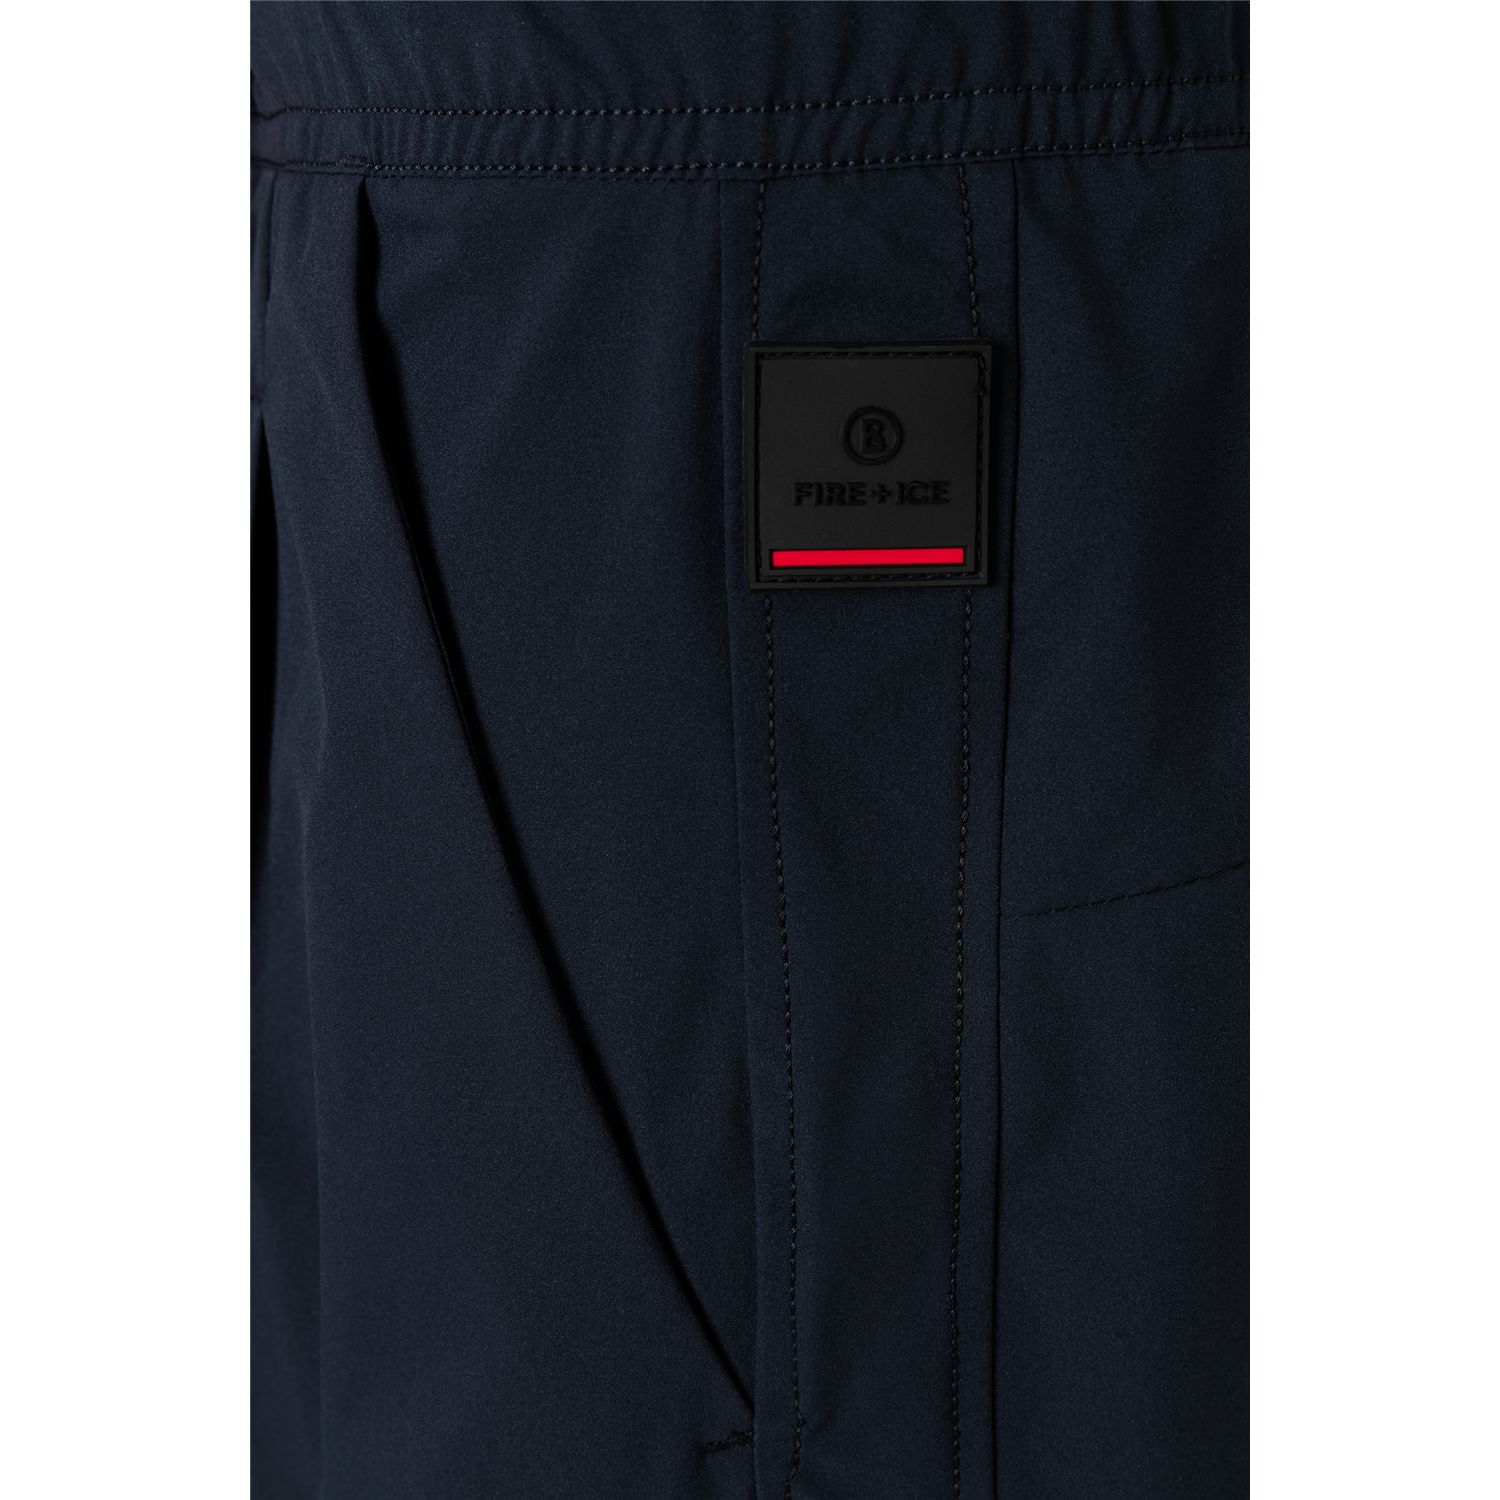 Pantaloni Lungi -  bogner fire and ice Bevan Functional Trousers